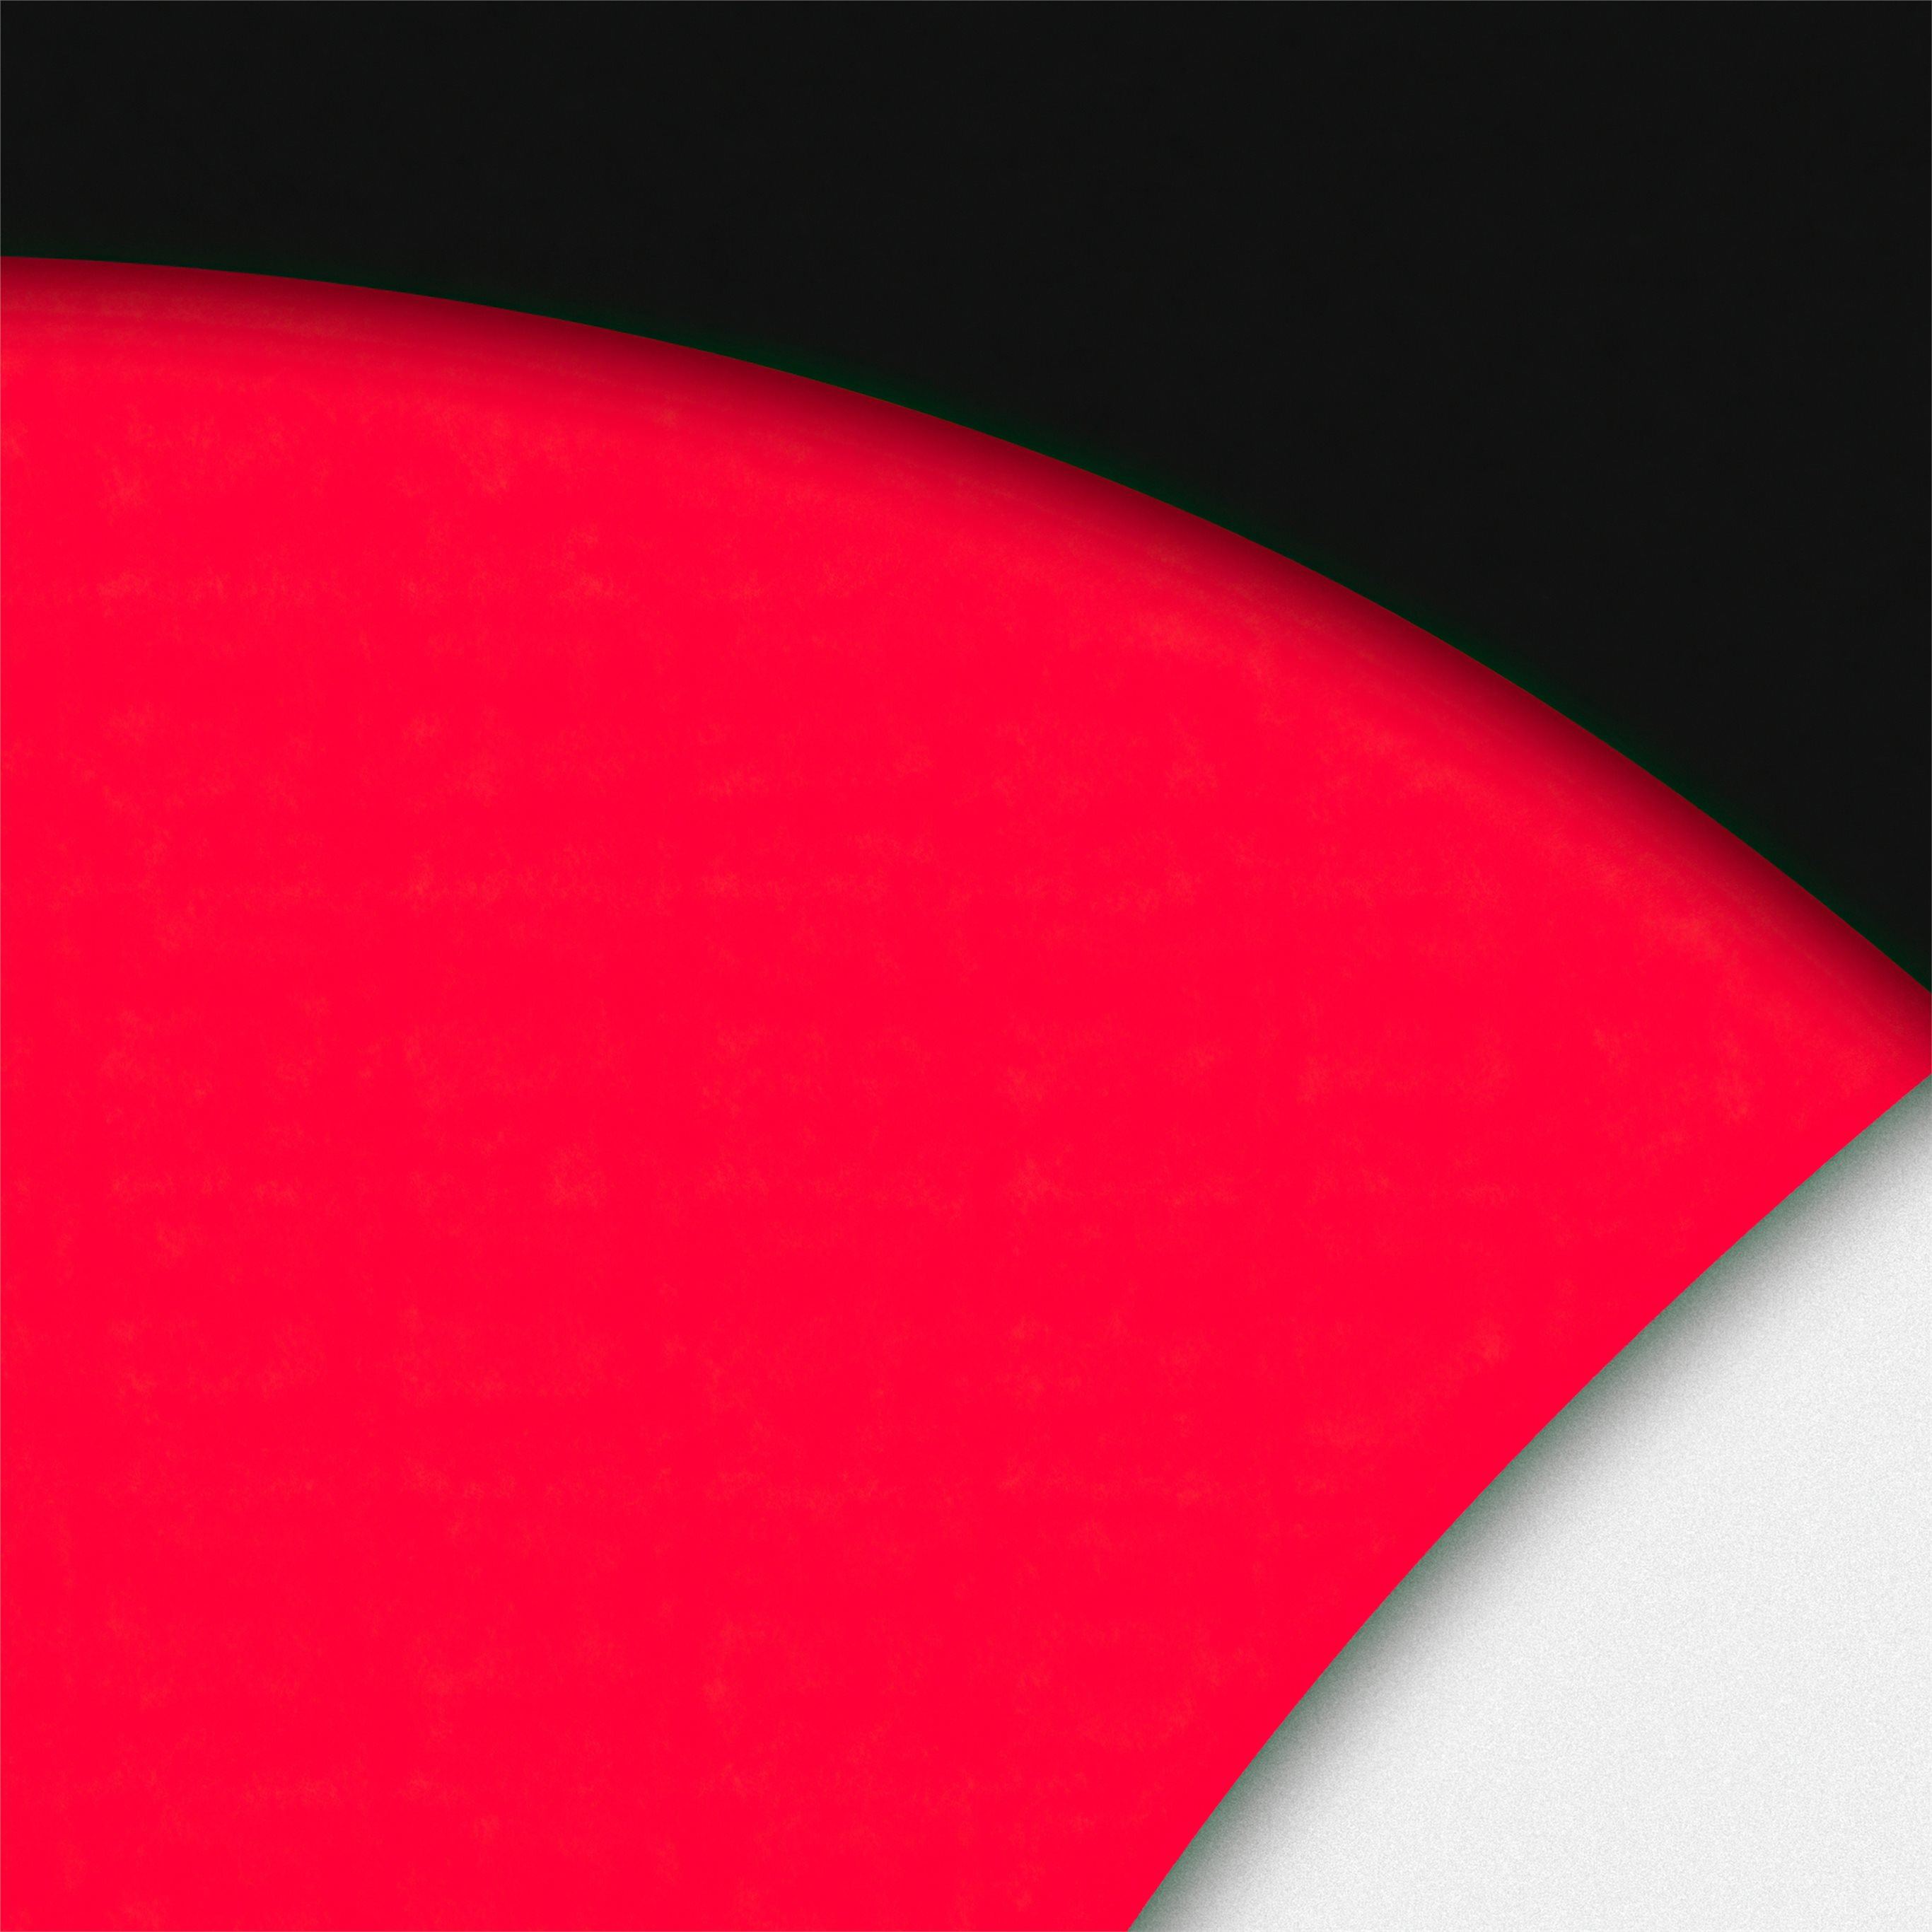 red black grey shapes abstract 4k iPad Pro Wallpaper Free Download